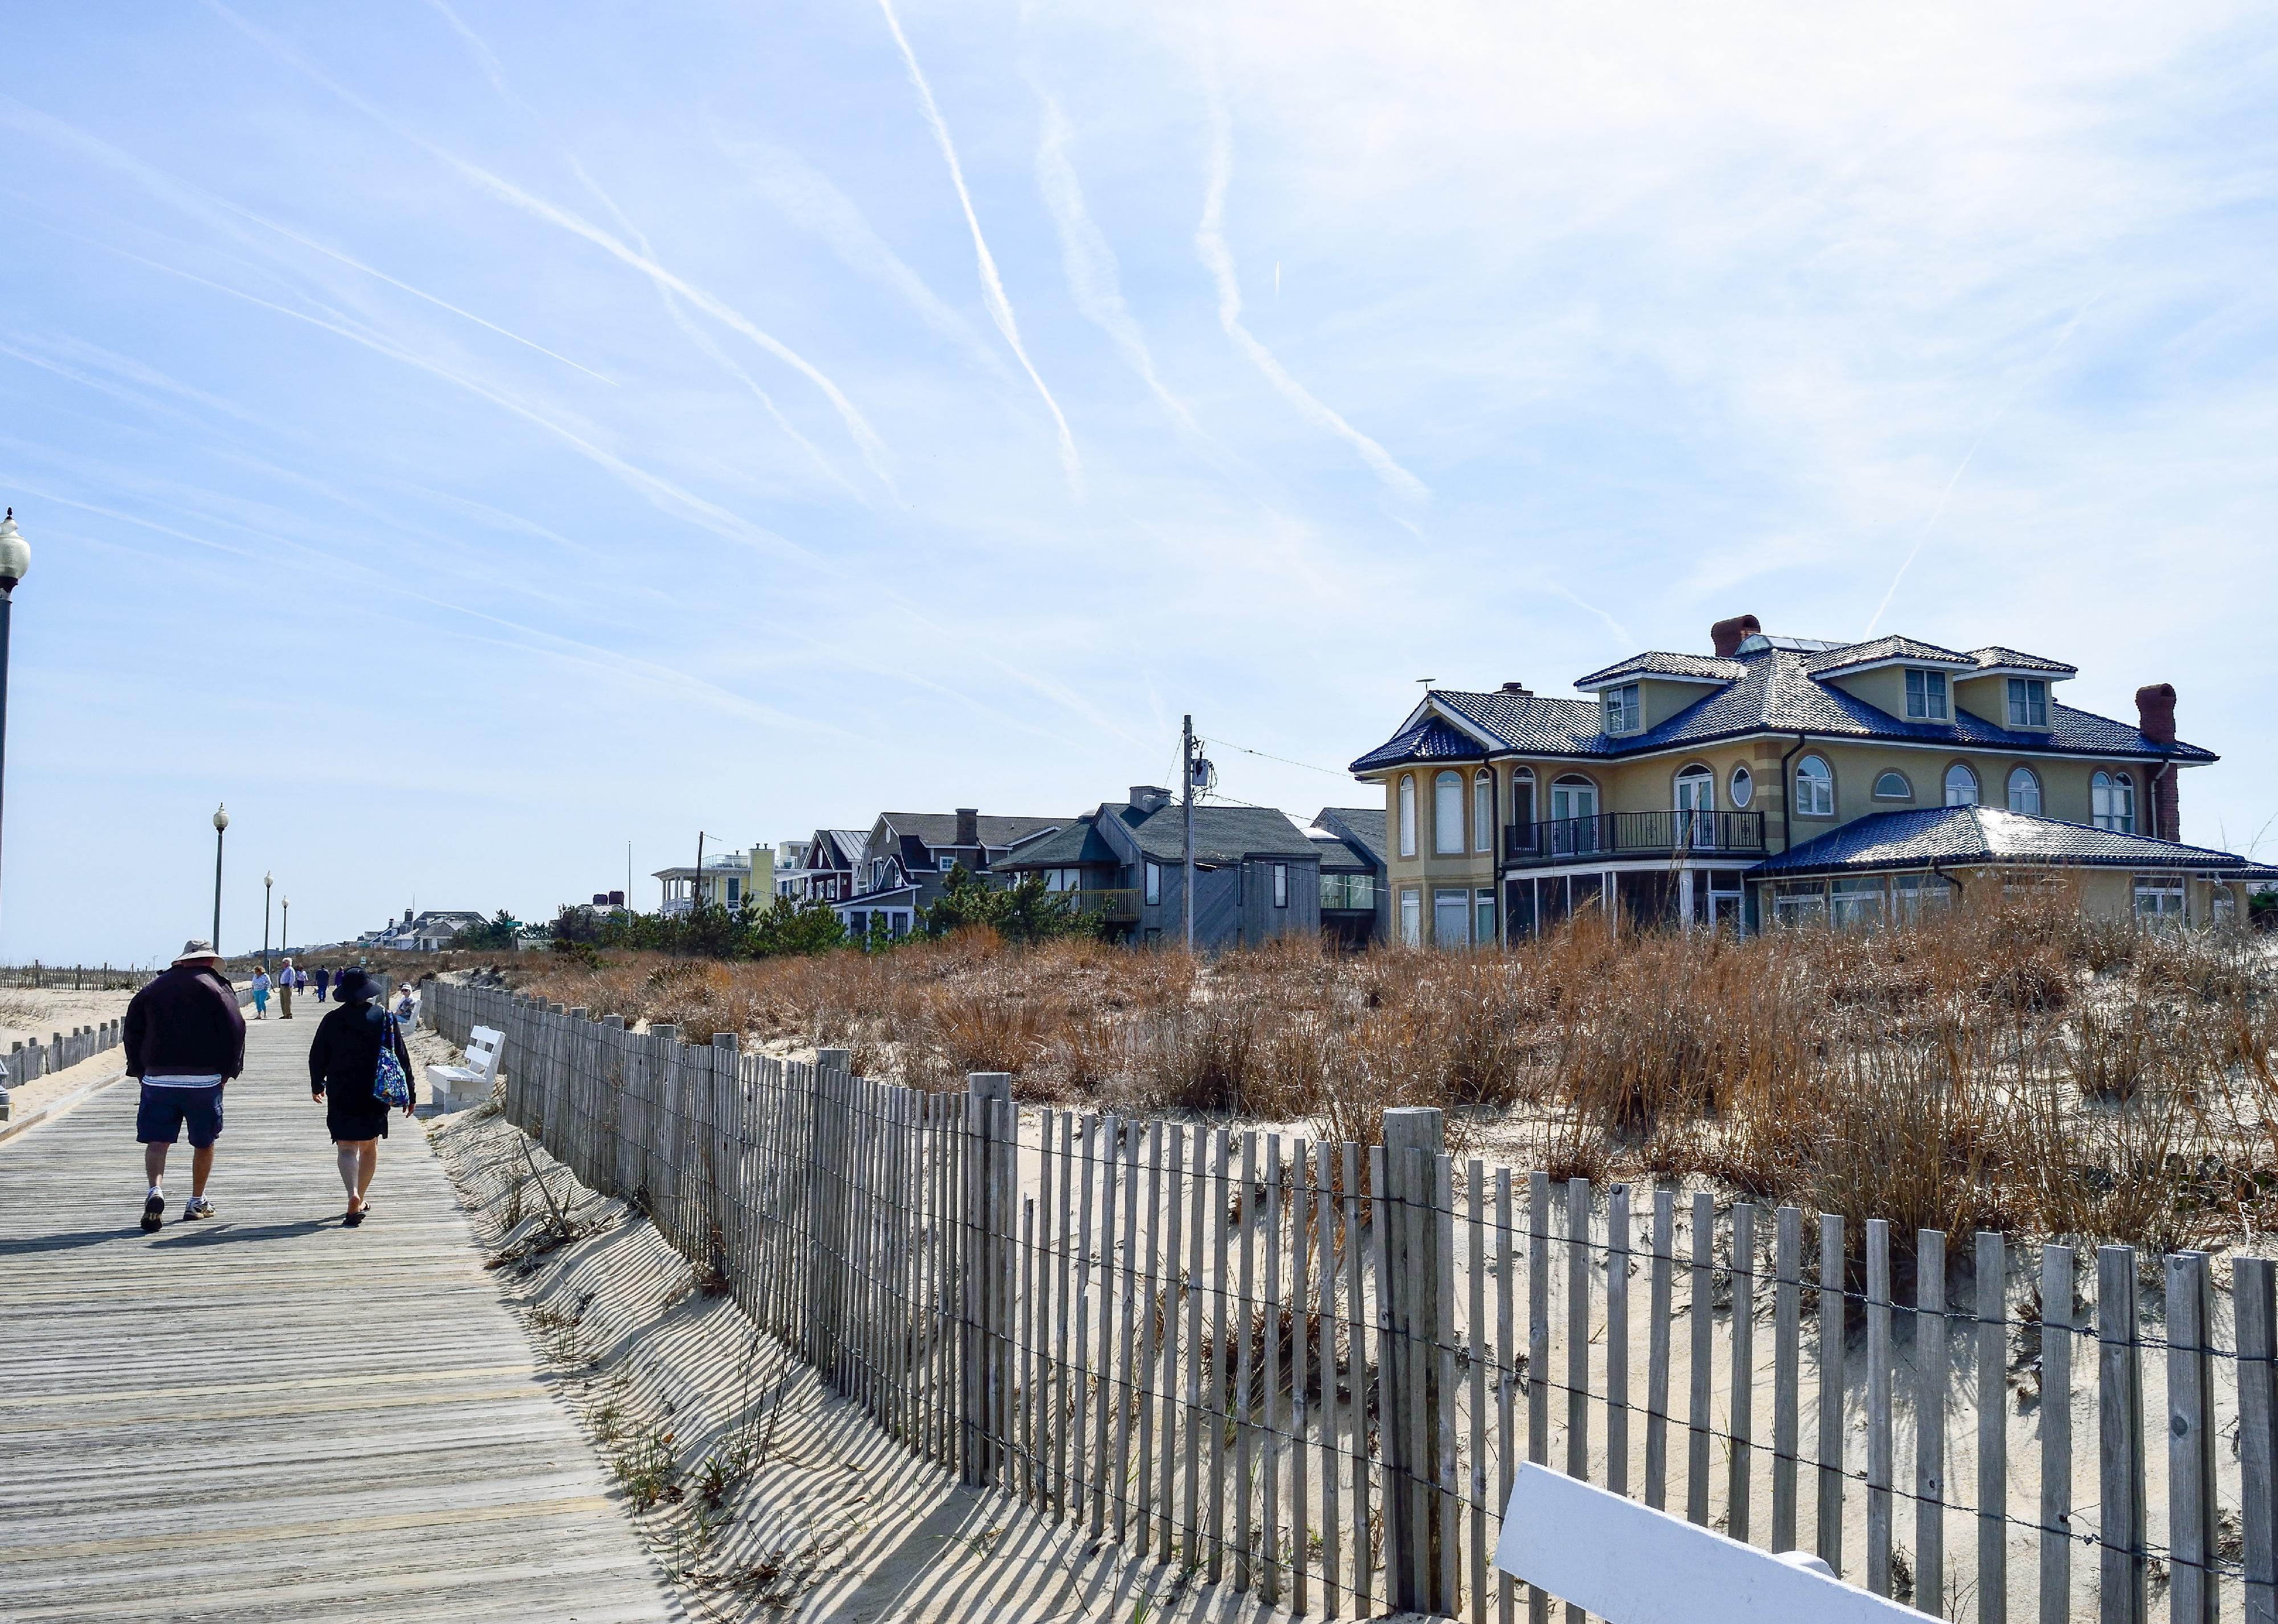 People walking on boardwalk by dunes and homes.